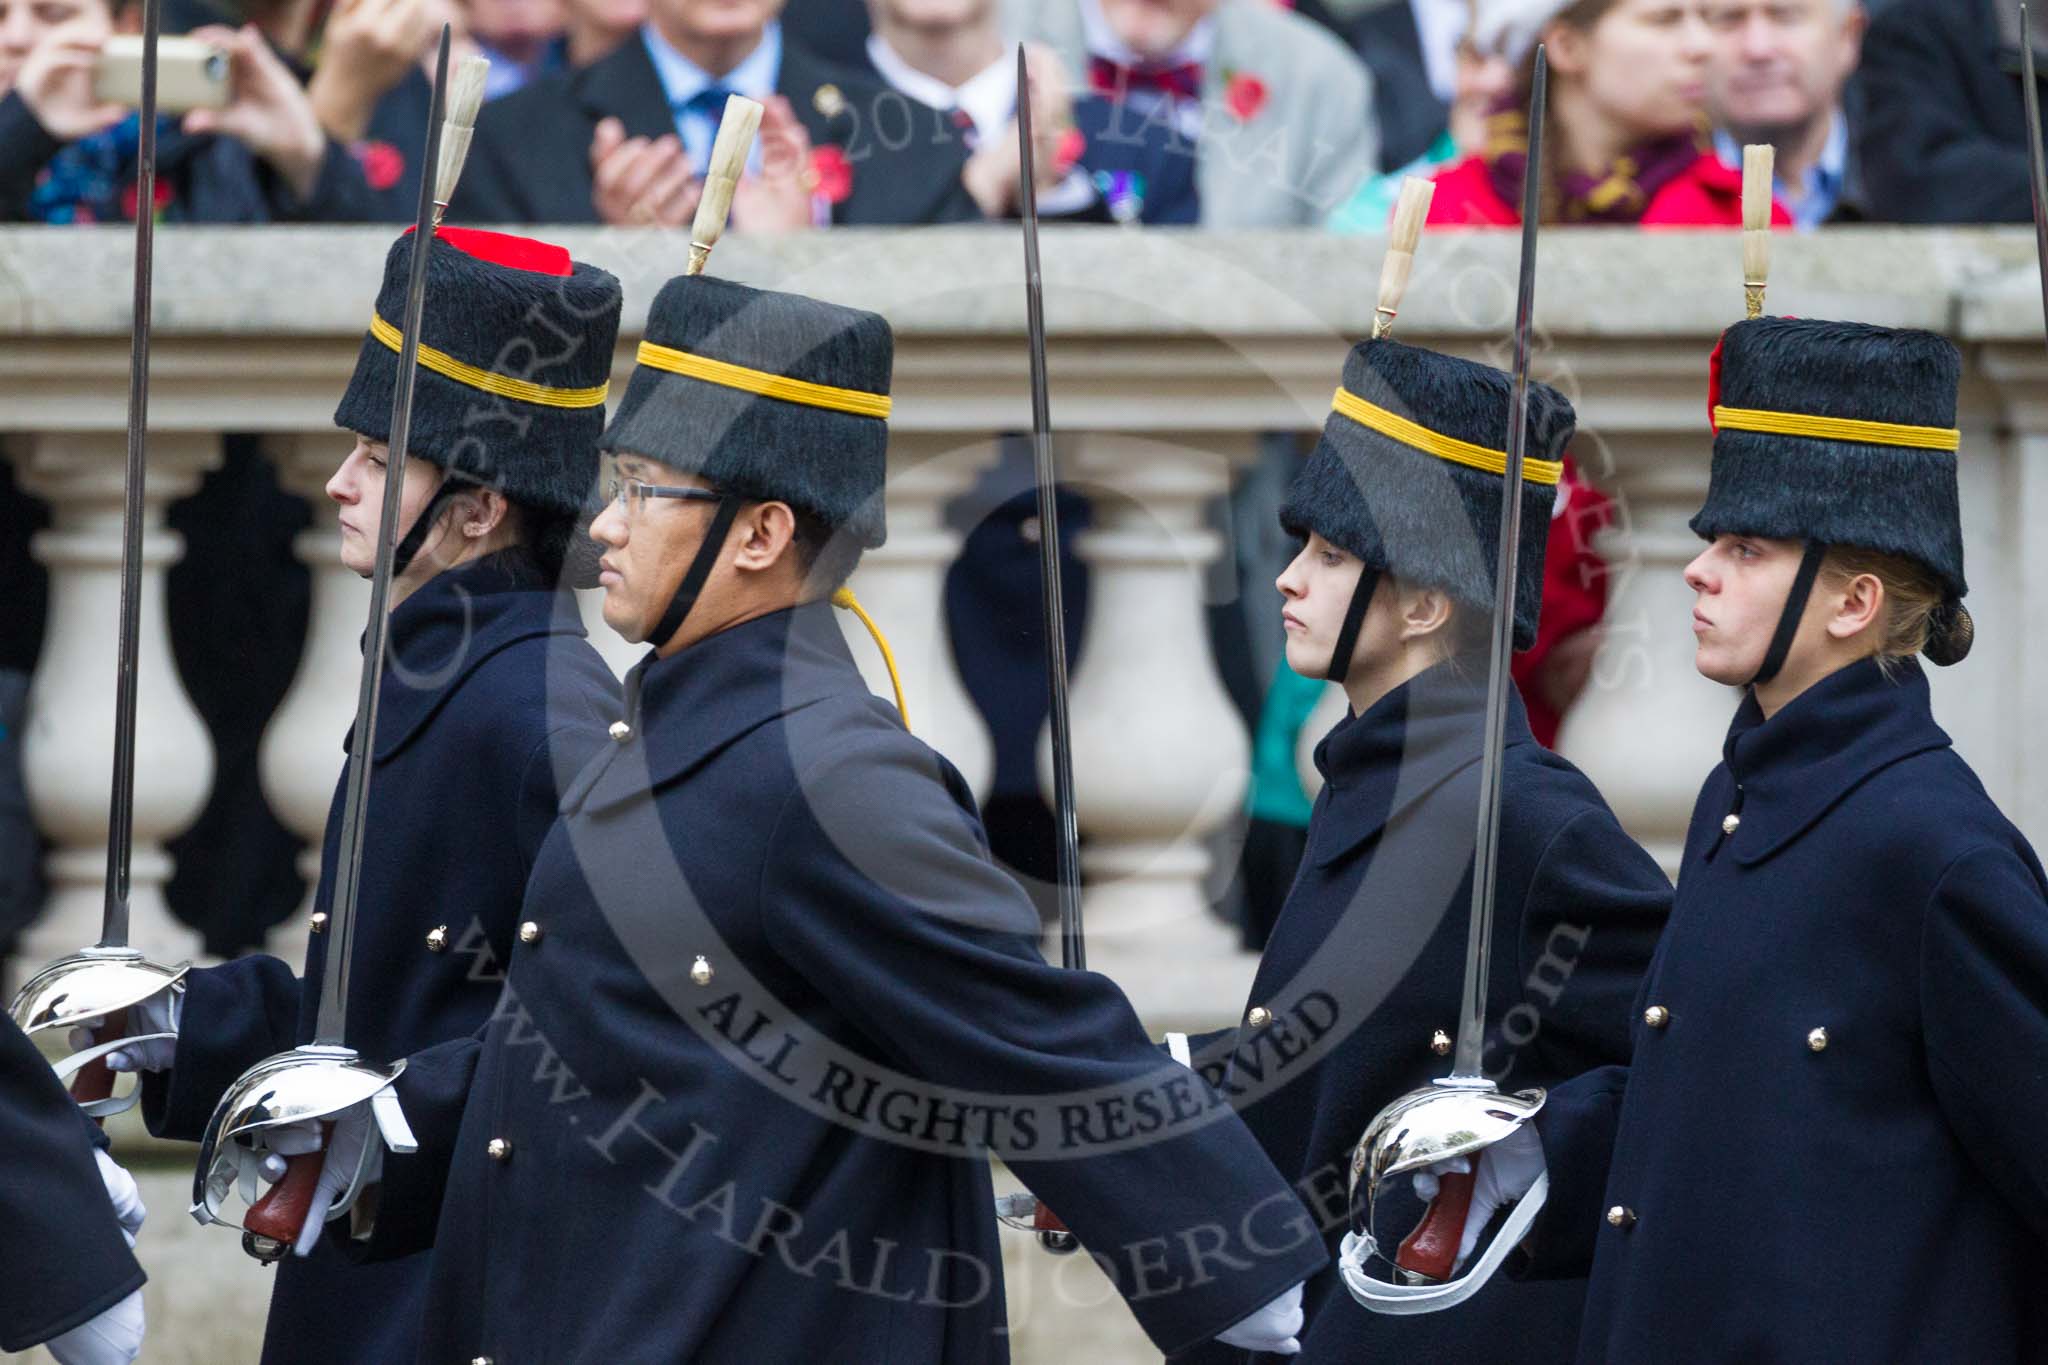 Remembrance Sunday at the Cenotaph 2015: Members of the Royal Horse Artillery detachment leaving Whitehall. Image #369, 08 November 2015 12:31 Whitehall, London, UK